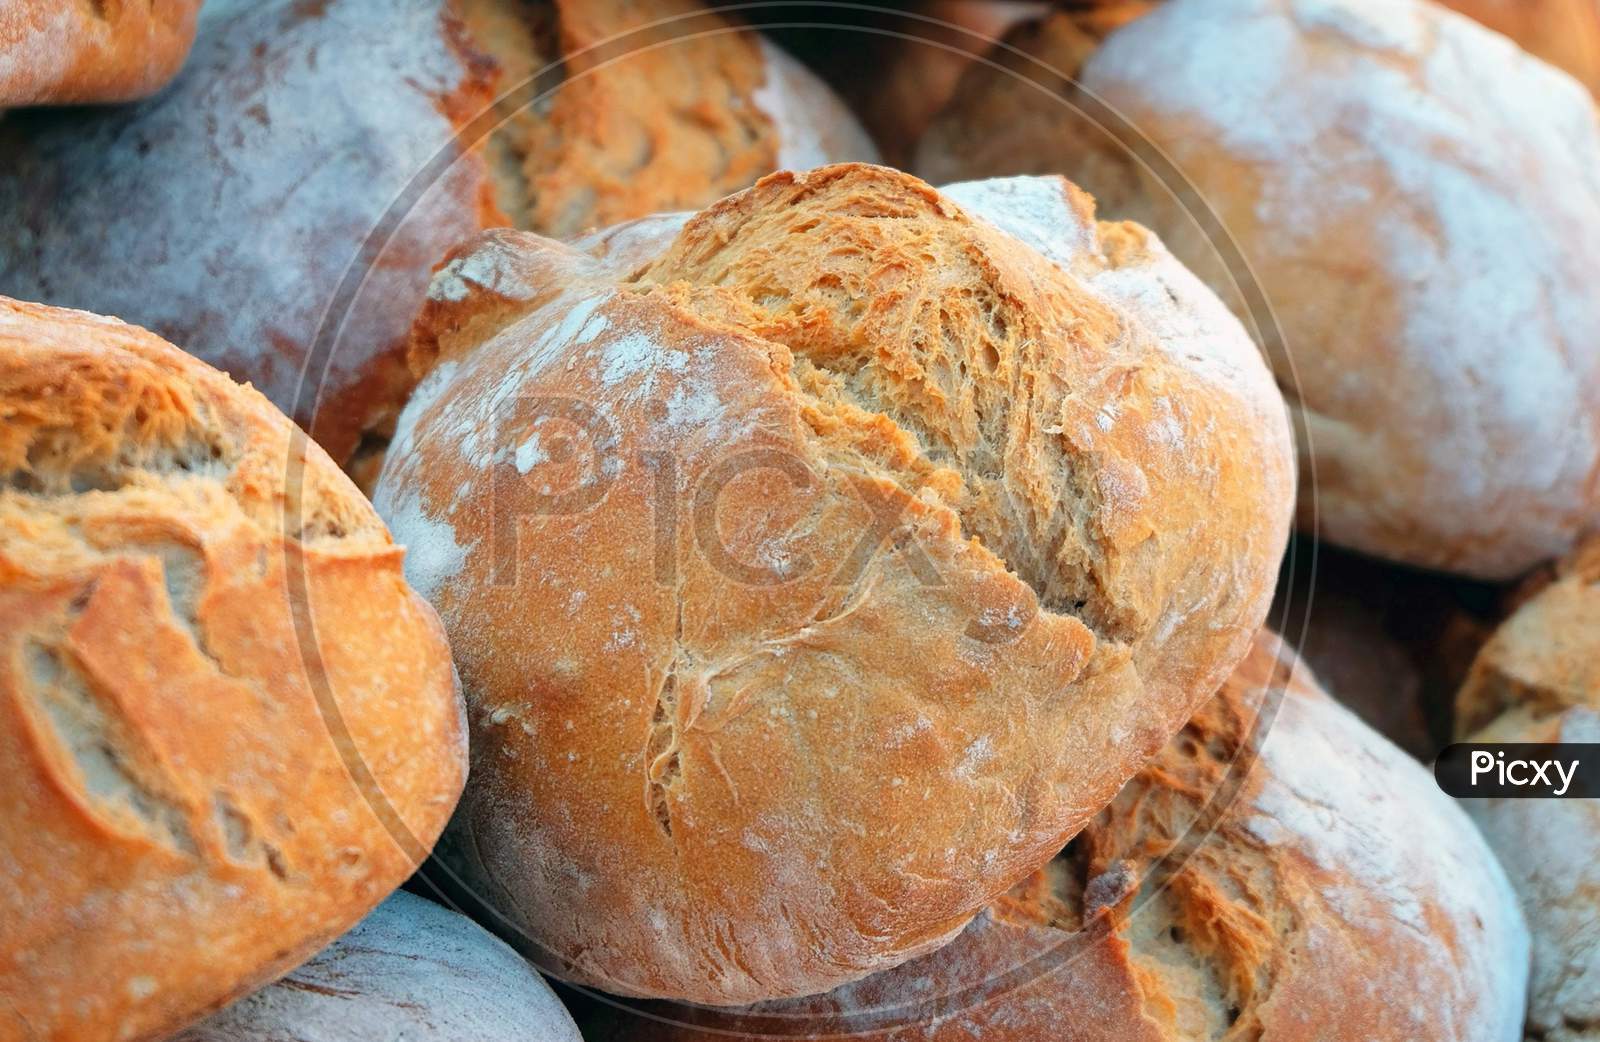 Bread is a staple food prepared from a dough of flour usually wheat and water, usually by baking.